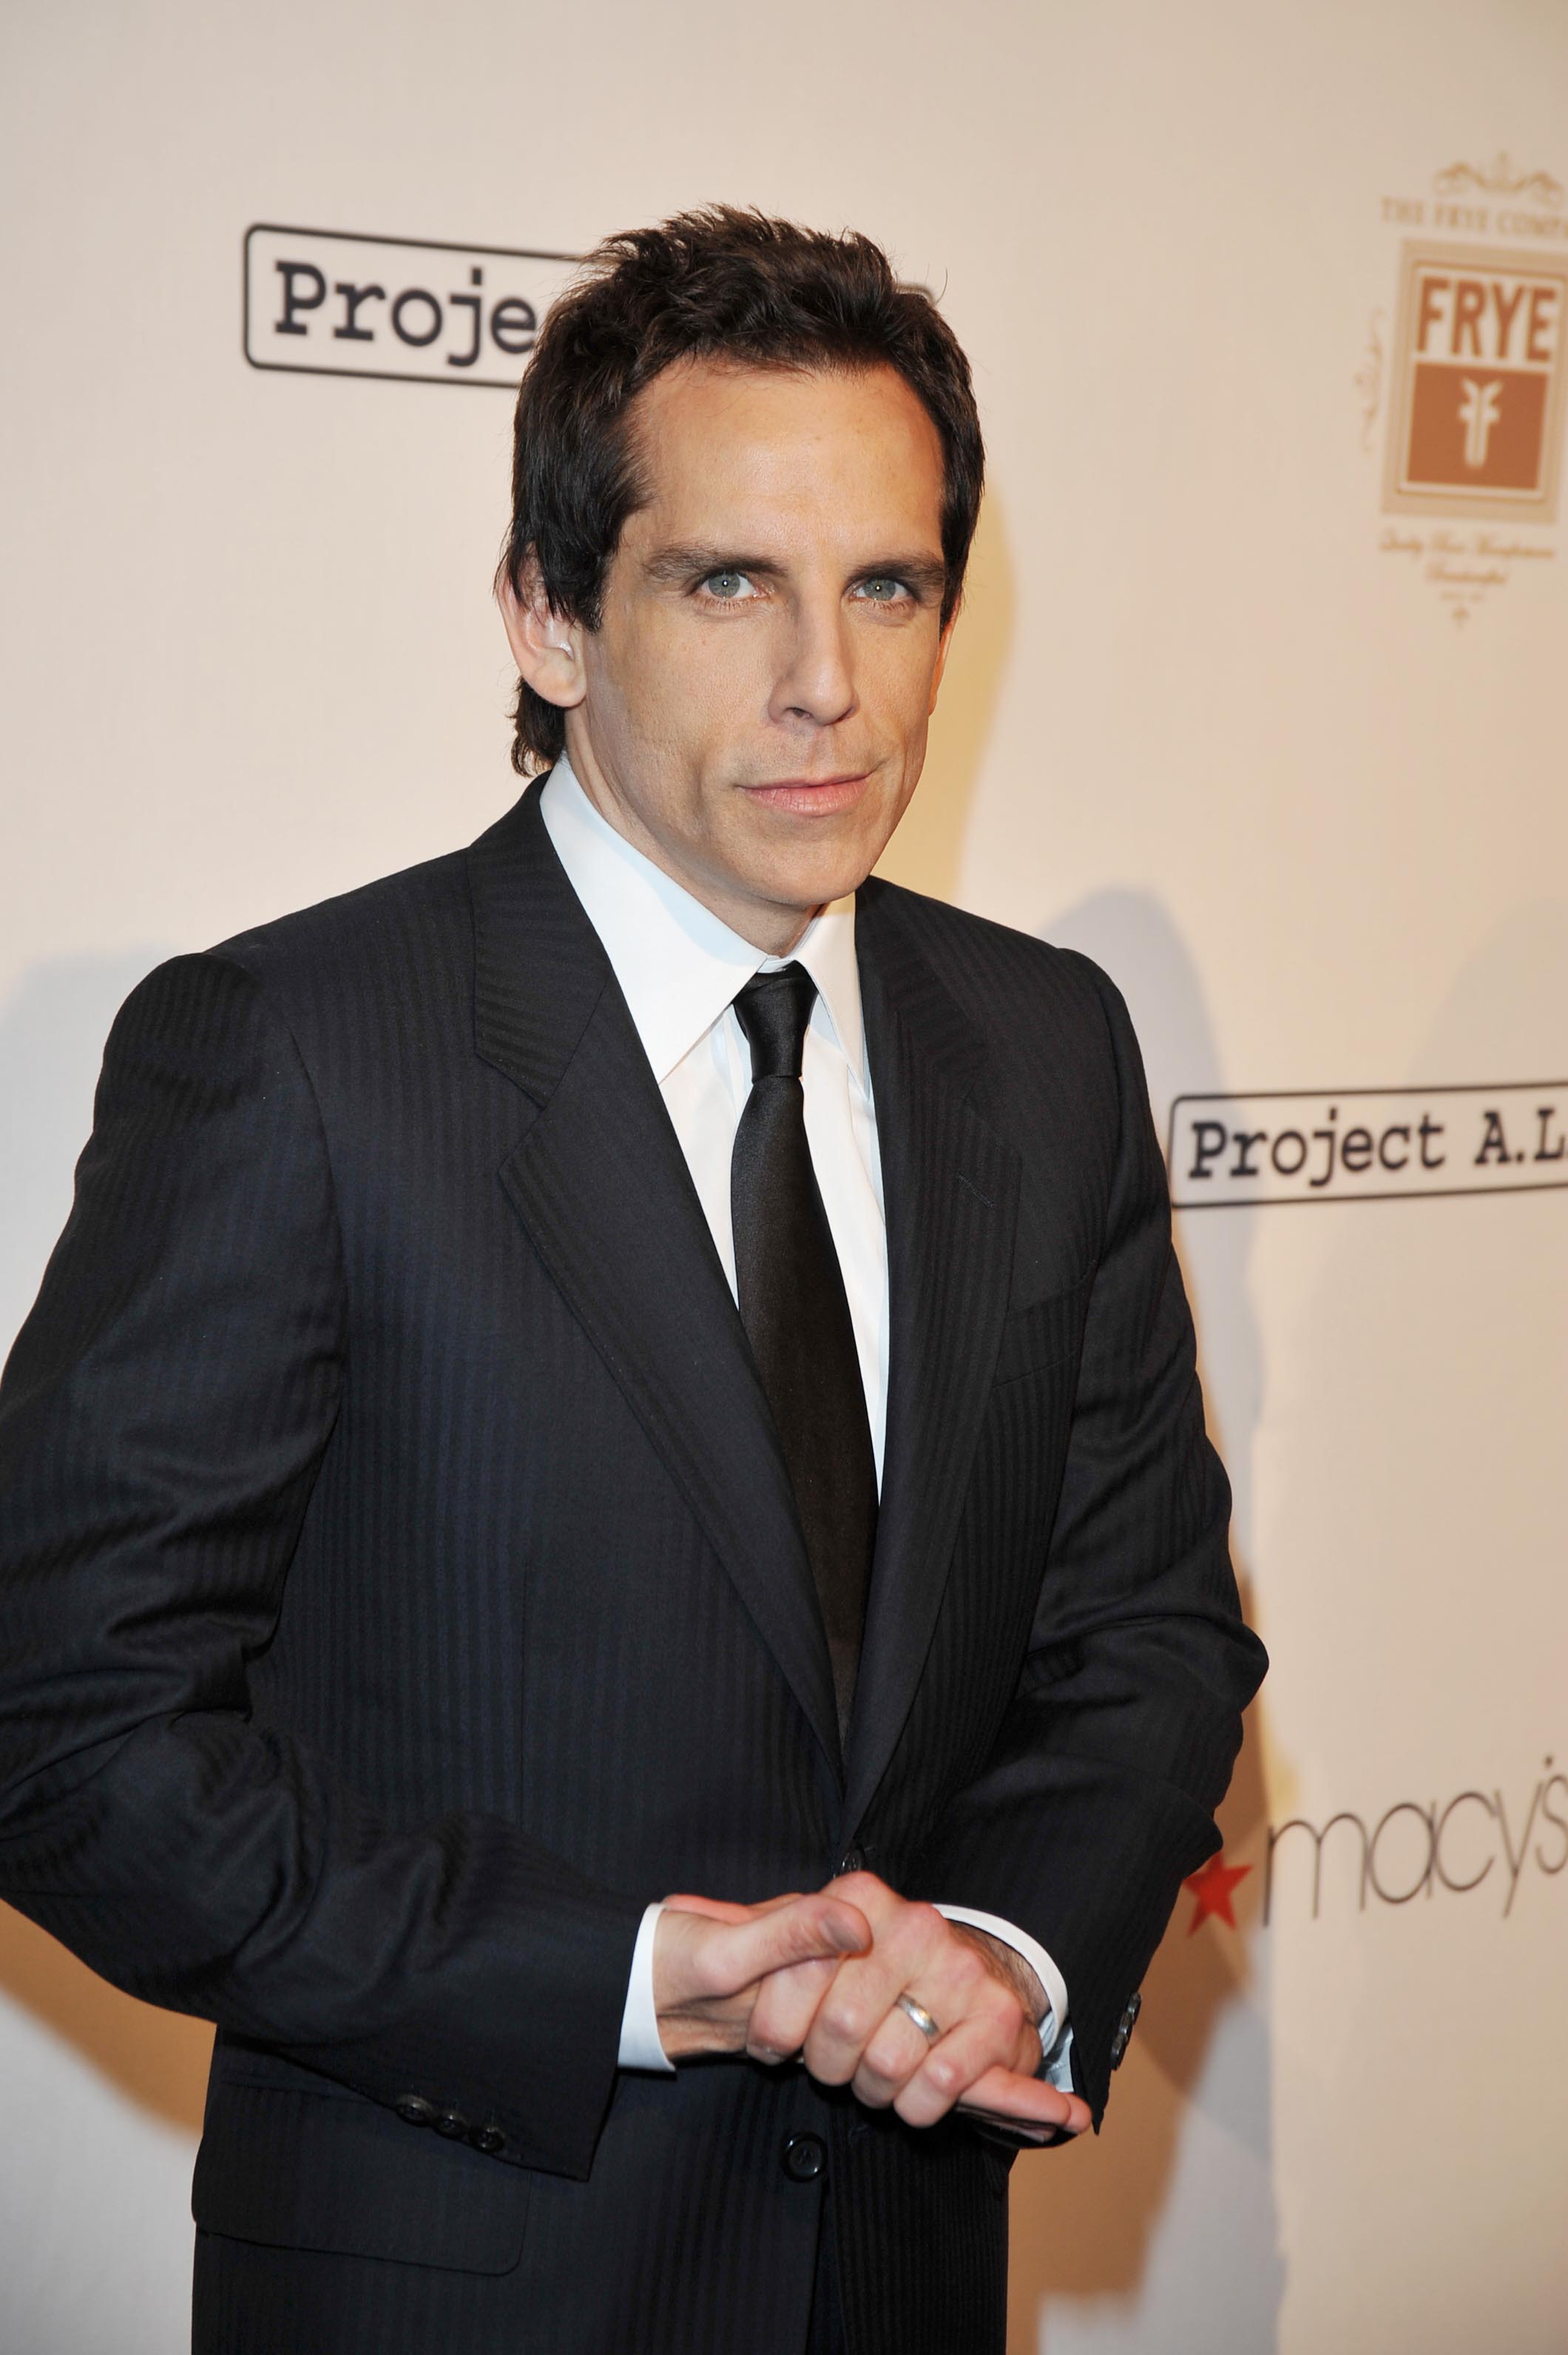 Ben Stiller at the ALS PROJECT "Tomorrow is tonight" 11th Annual Benefit Gala October 7, 2008 |  Source: Getty Images